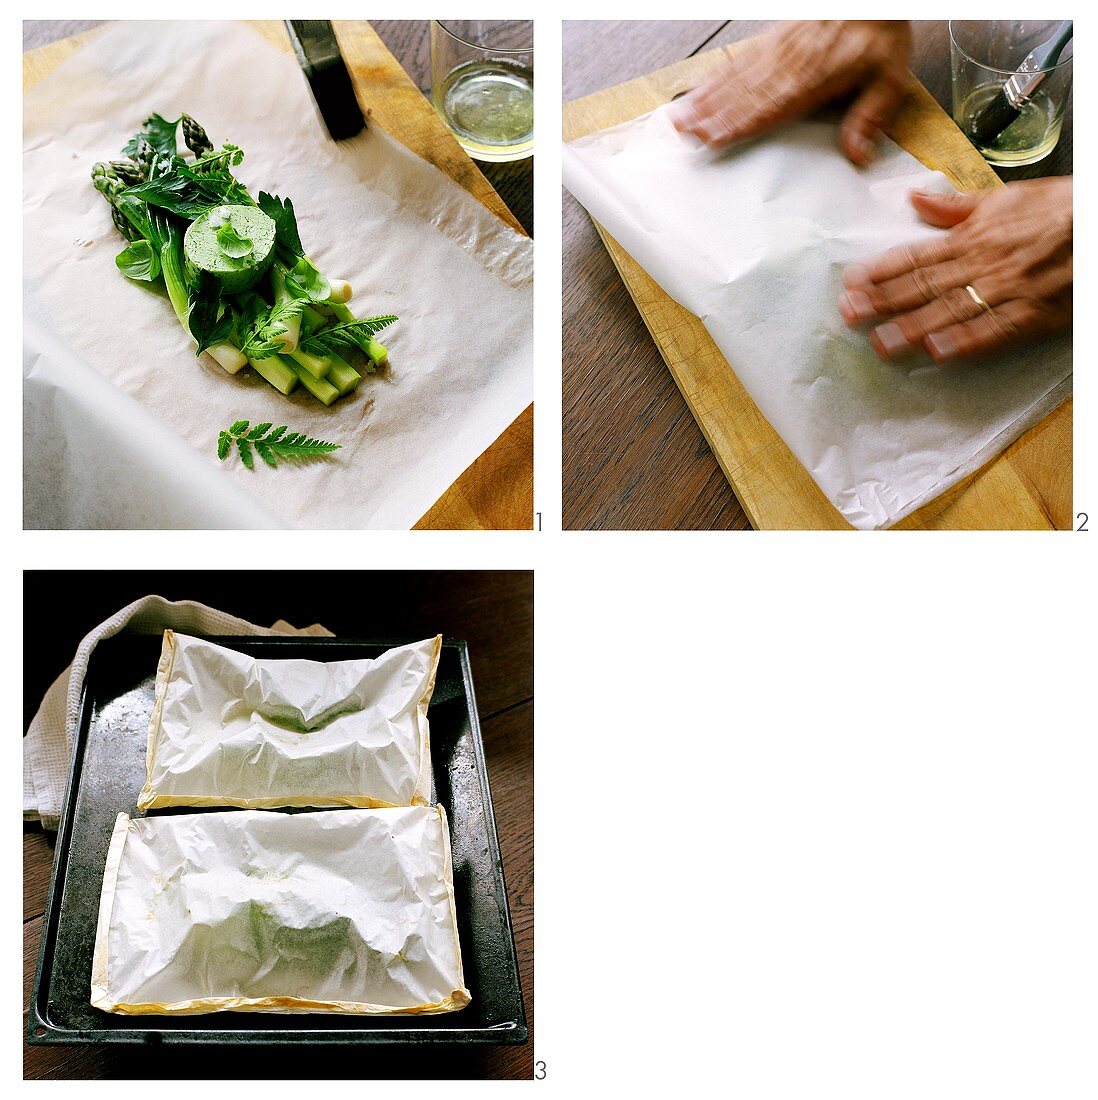 Baking green asparagus in paper